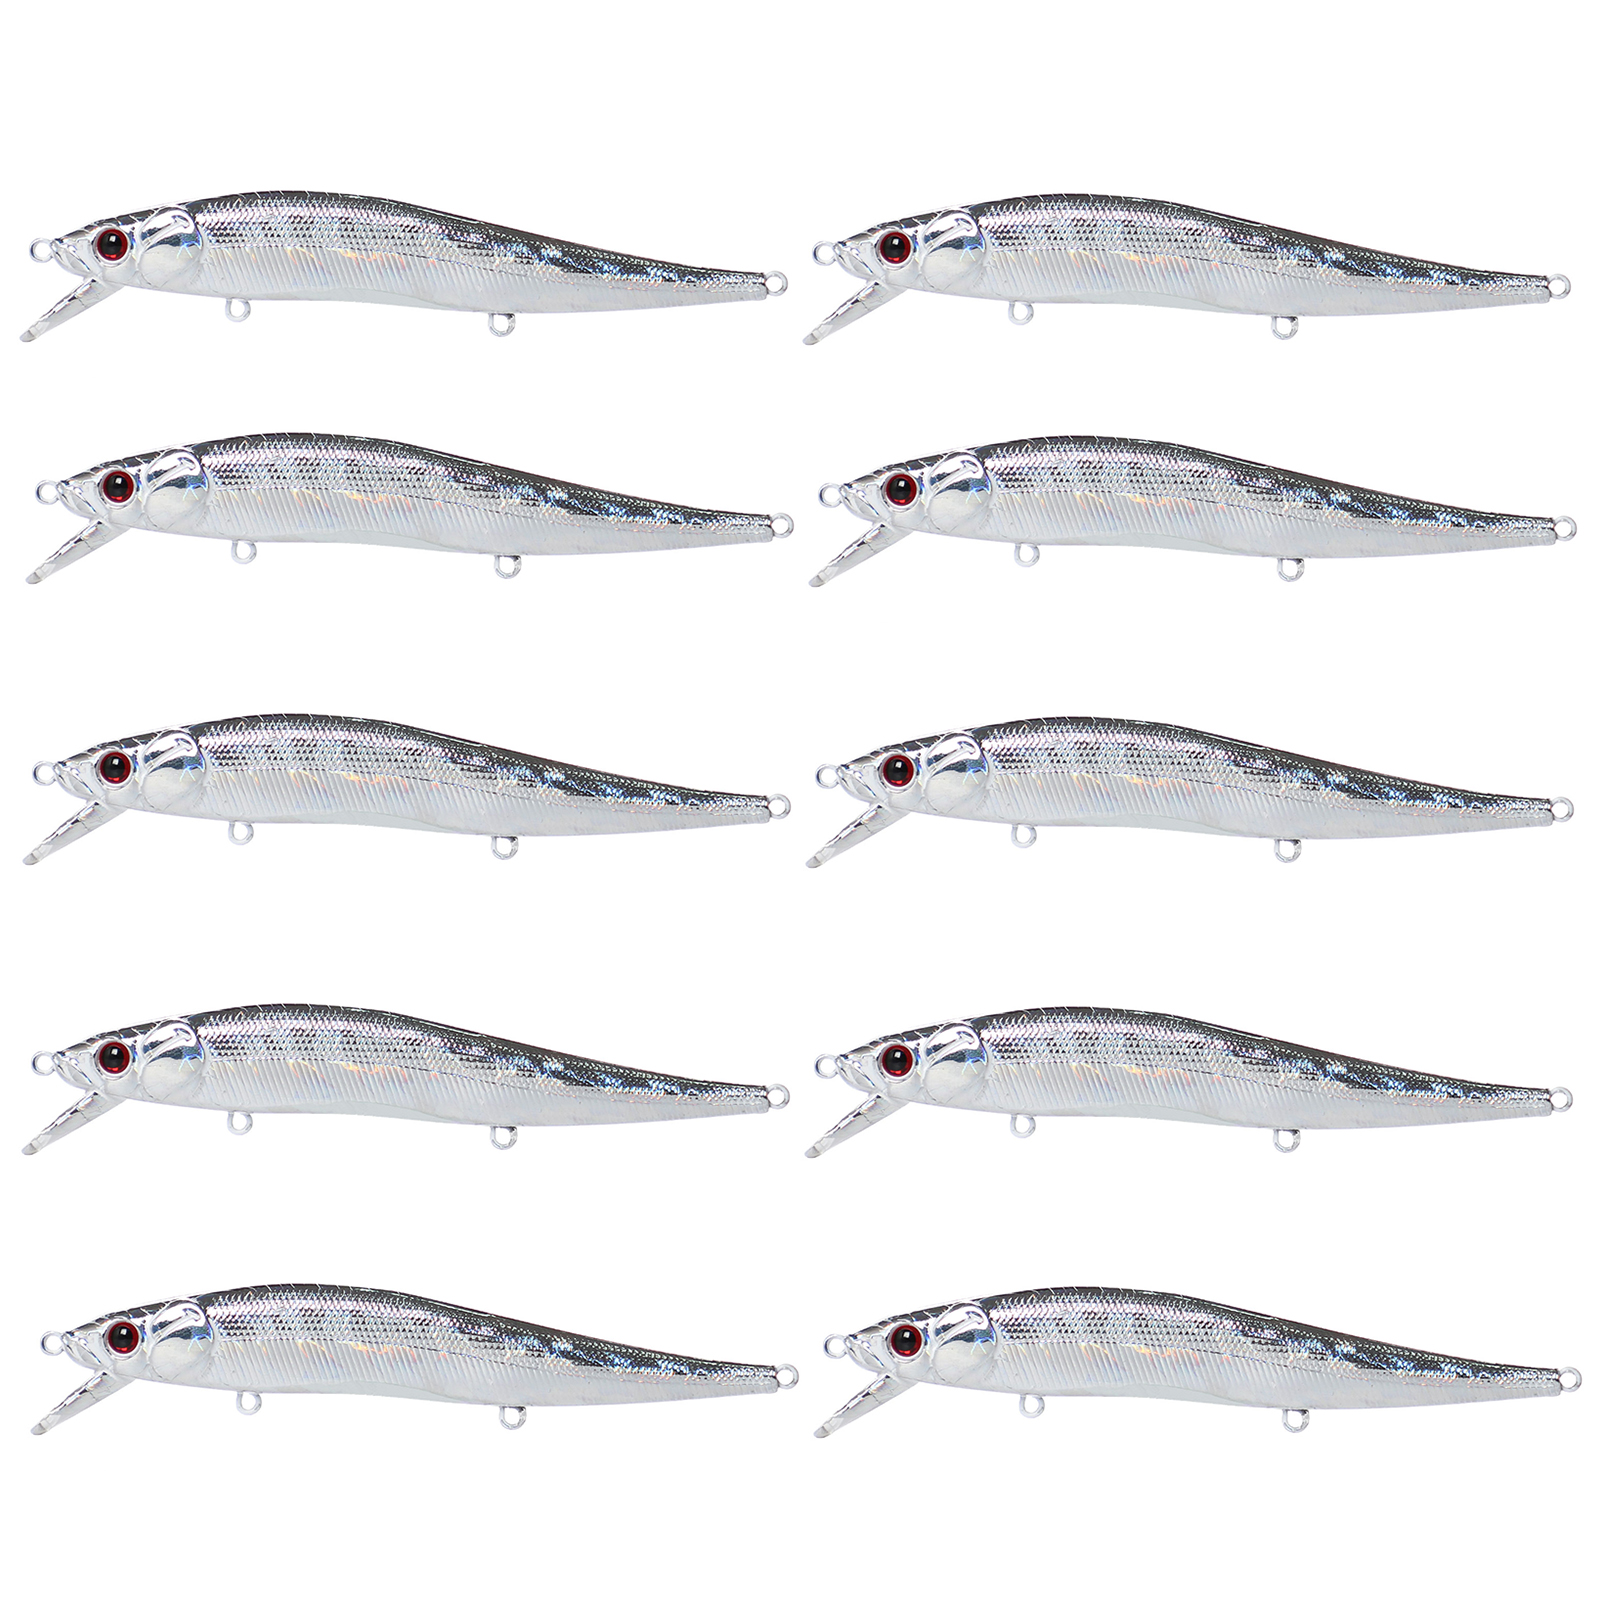 FREE FISHER Fishing Blank Lures Set 10pcs/Lot Unpainted Baits Minnows Crankbaits Pencil Lures Clear Naked Bait Embryo with Ring Eyes